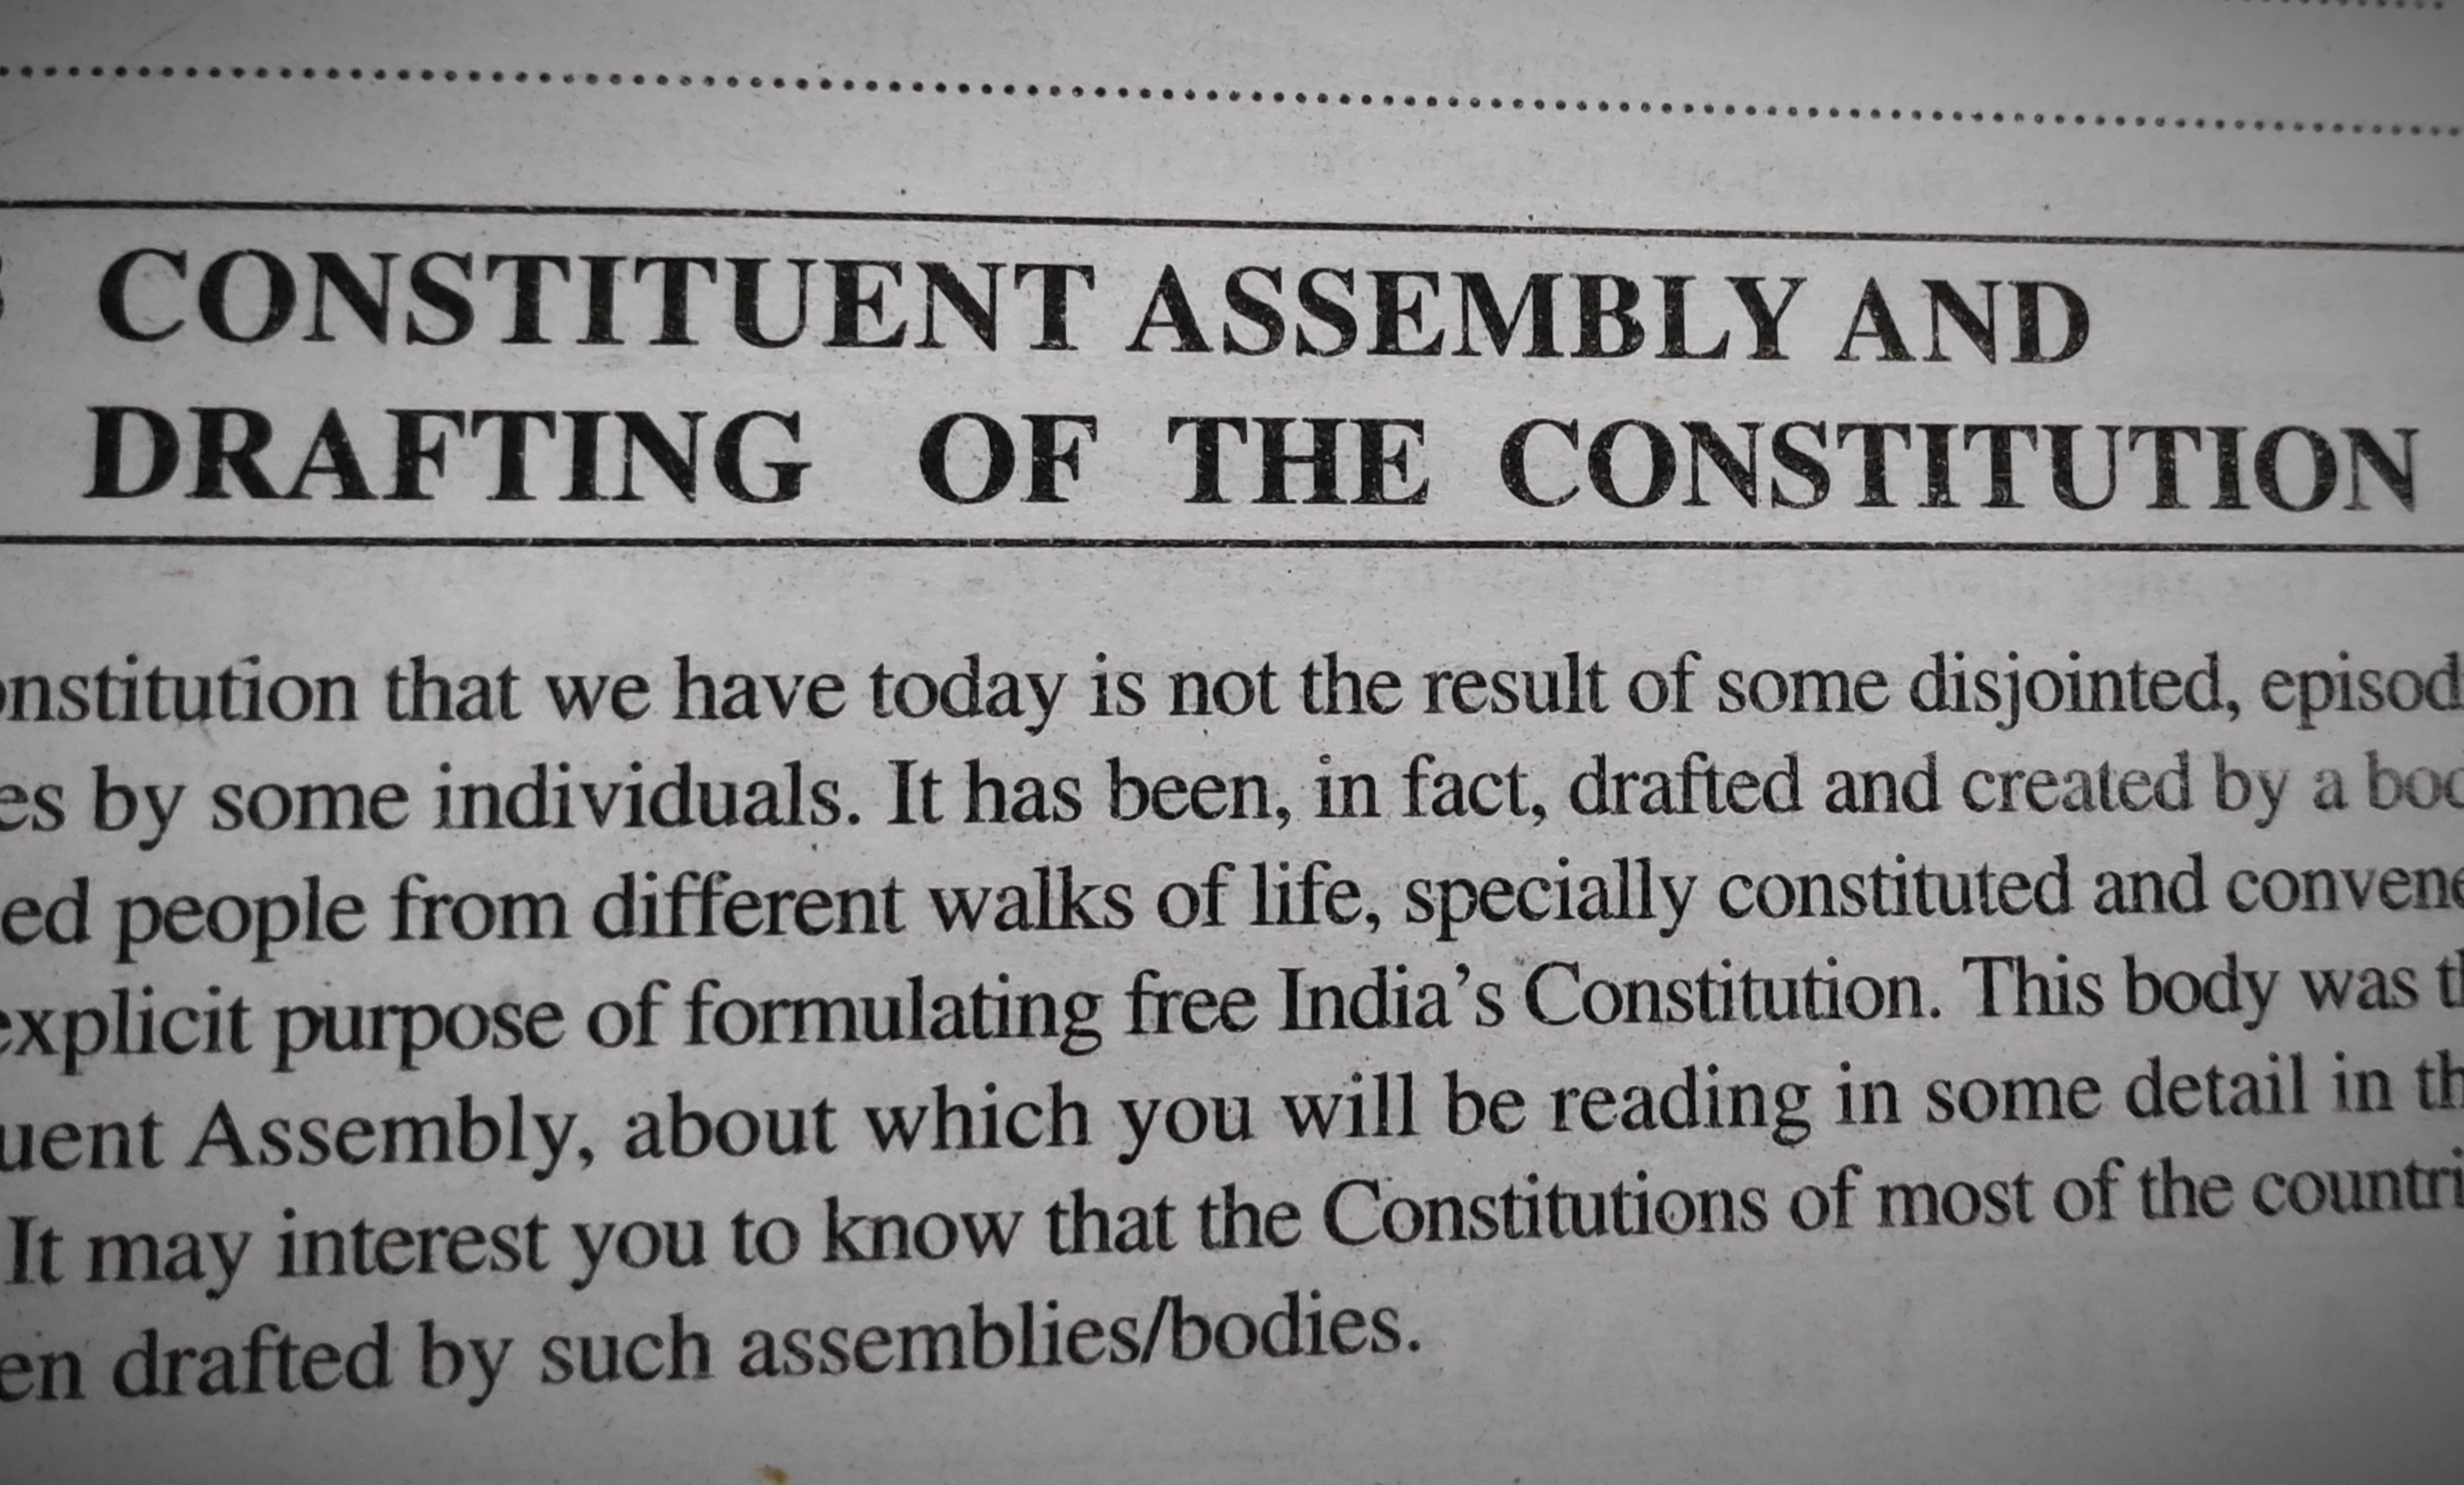 The Constituent assembly